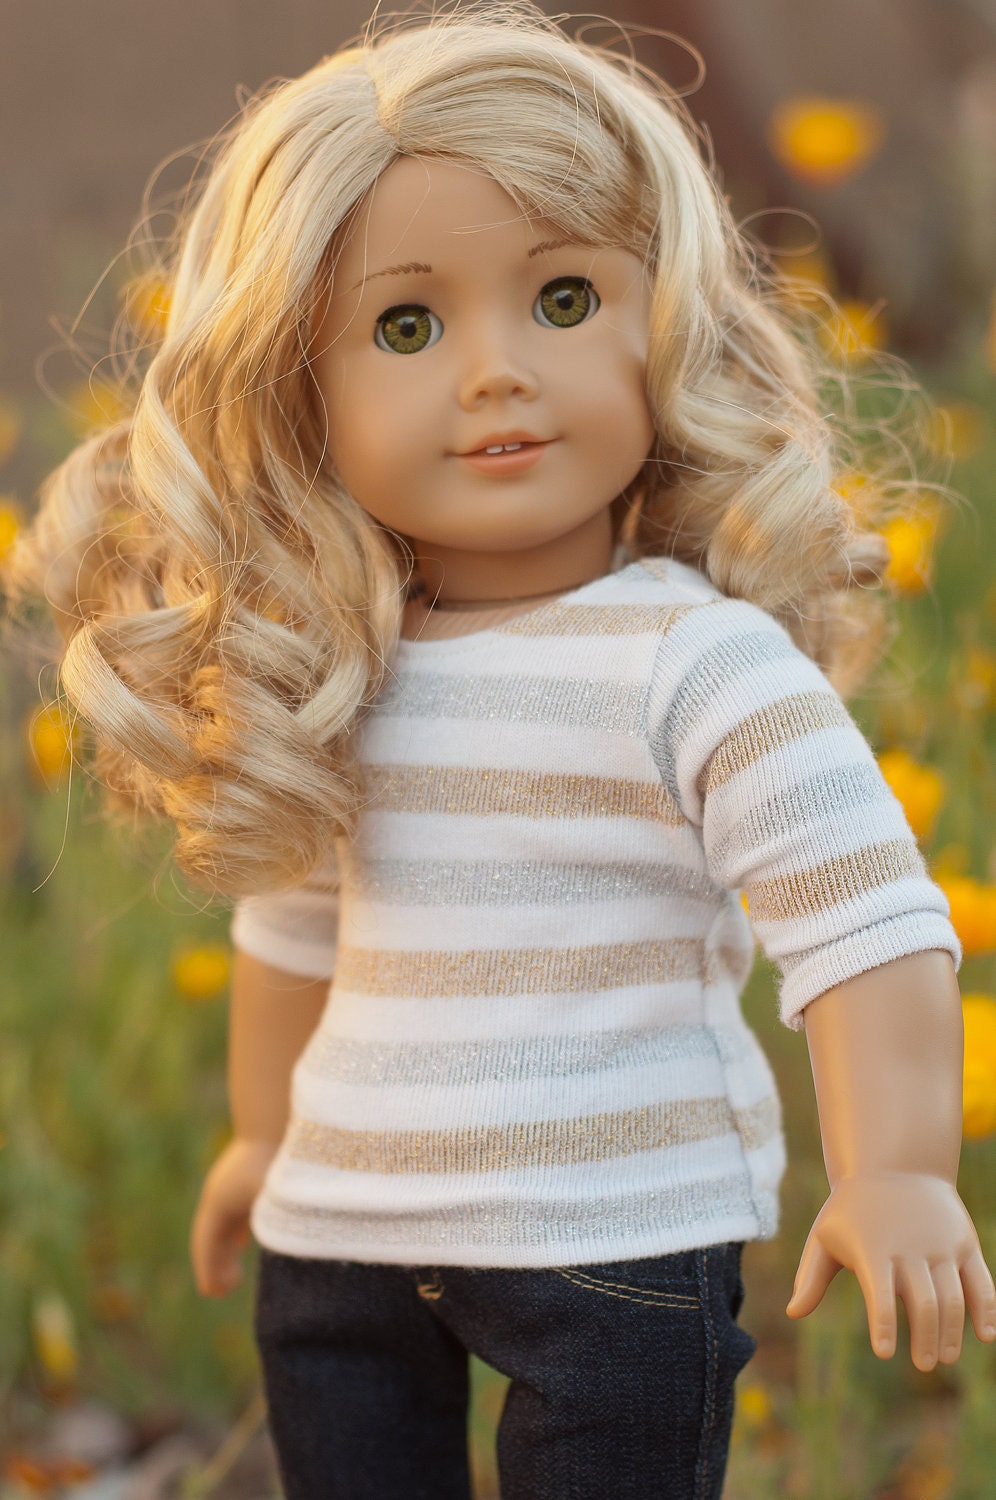 Doll Clothes: 3/4 Sleeve Cream Sweater with Gold and Silver Stripes for an American Girl Doll or other 18 Inch Dolls